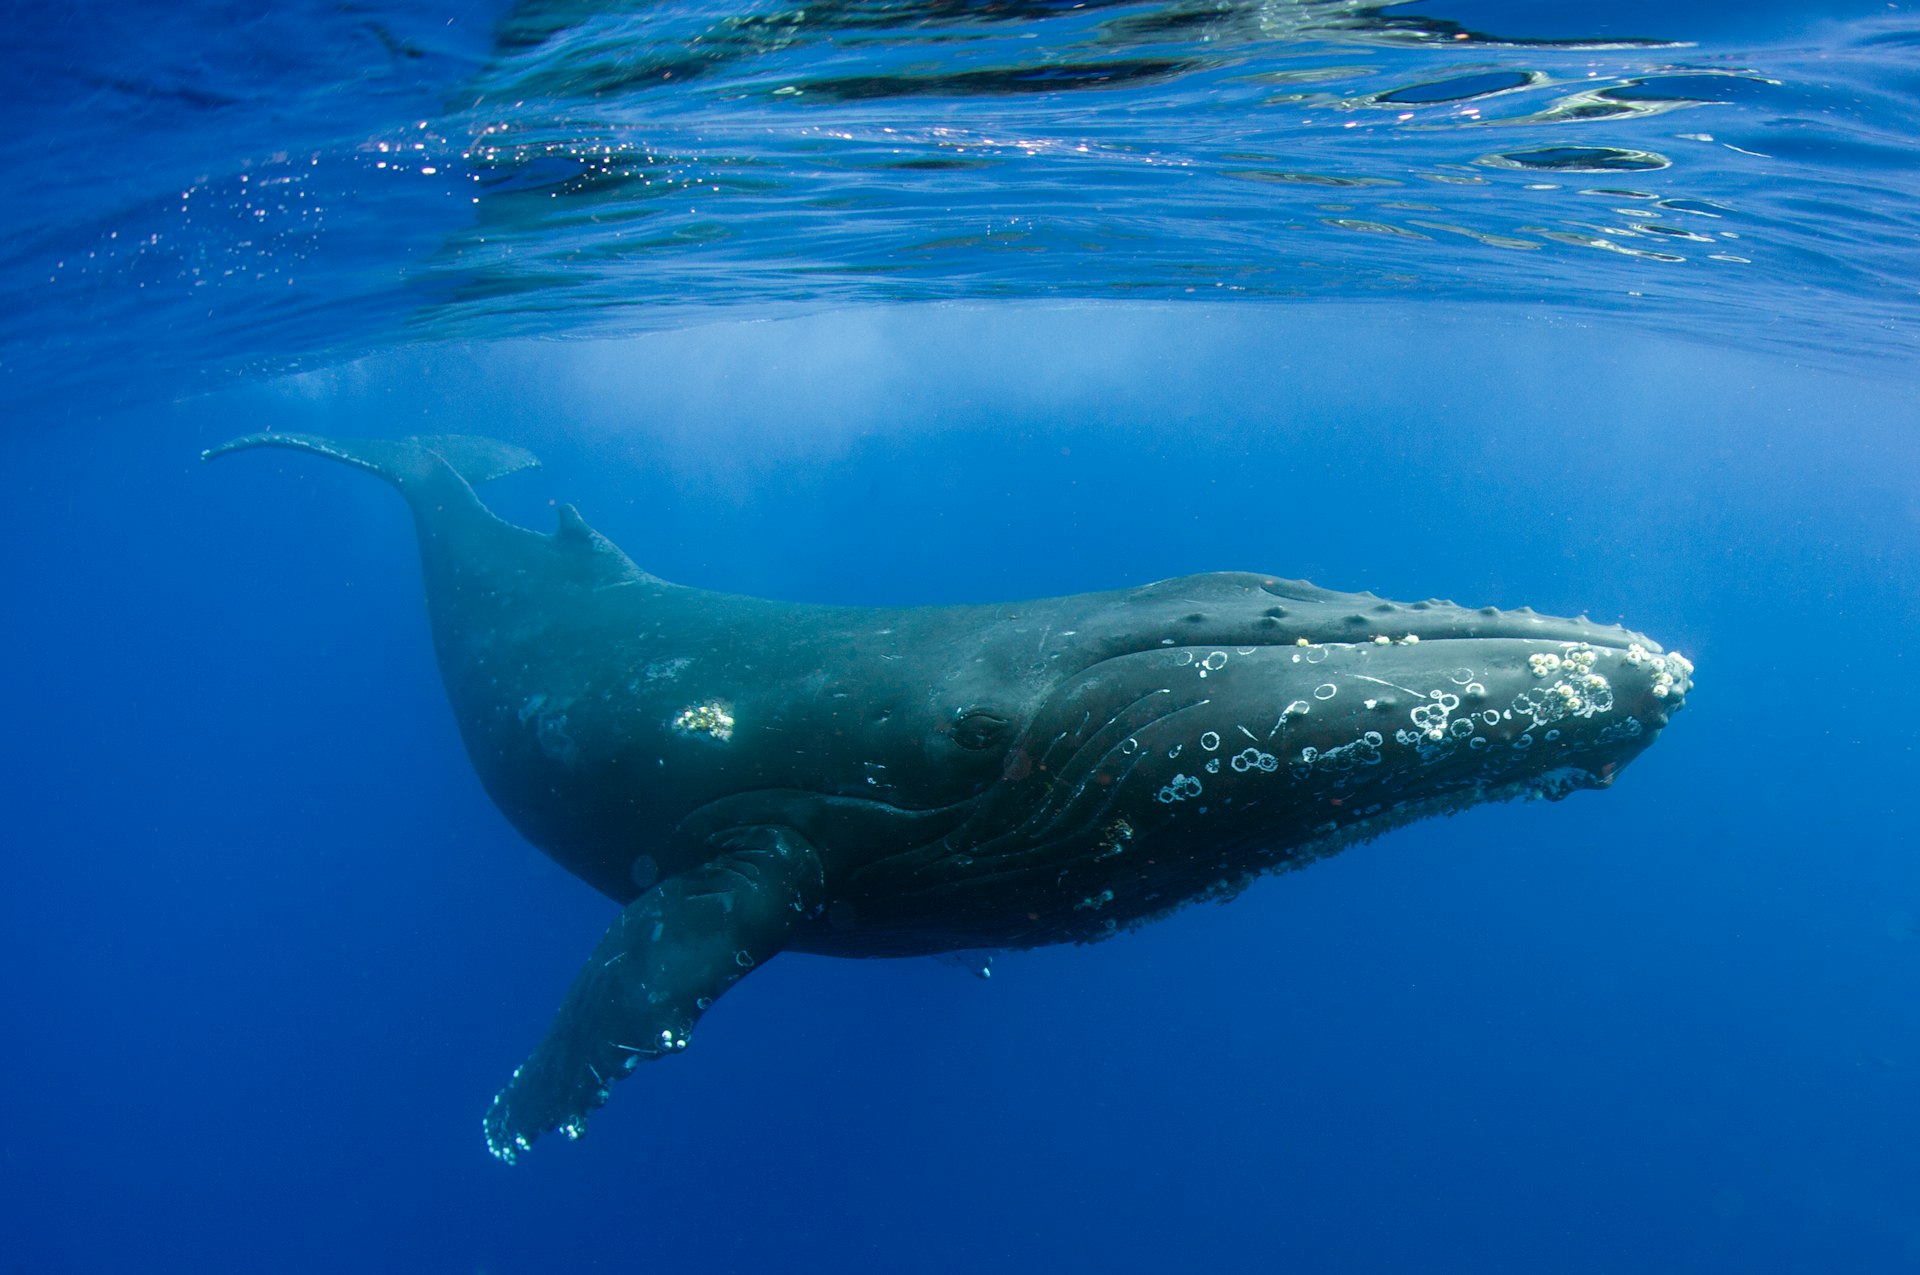 Humpback whale swimming underwater off Maui